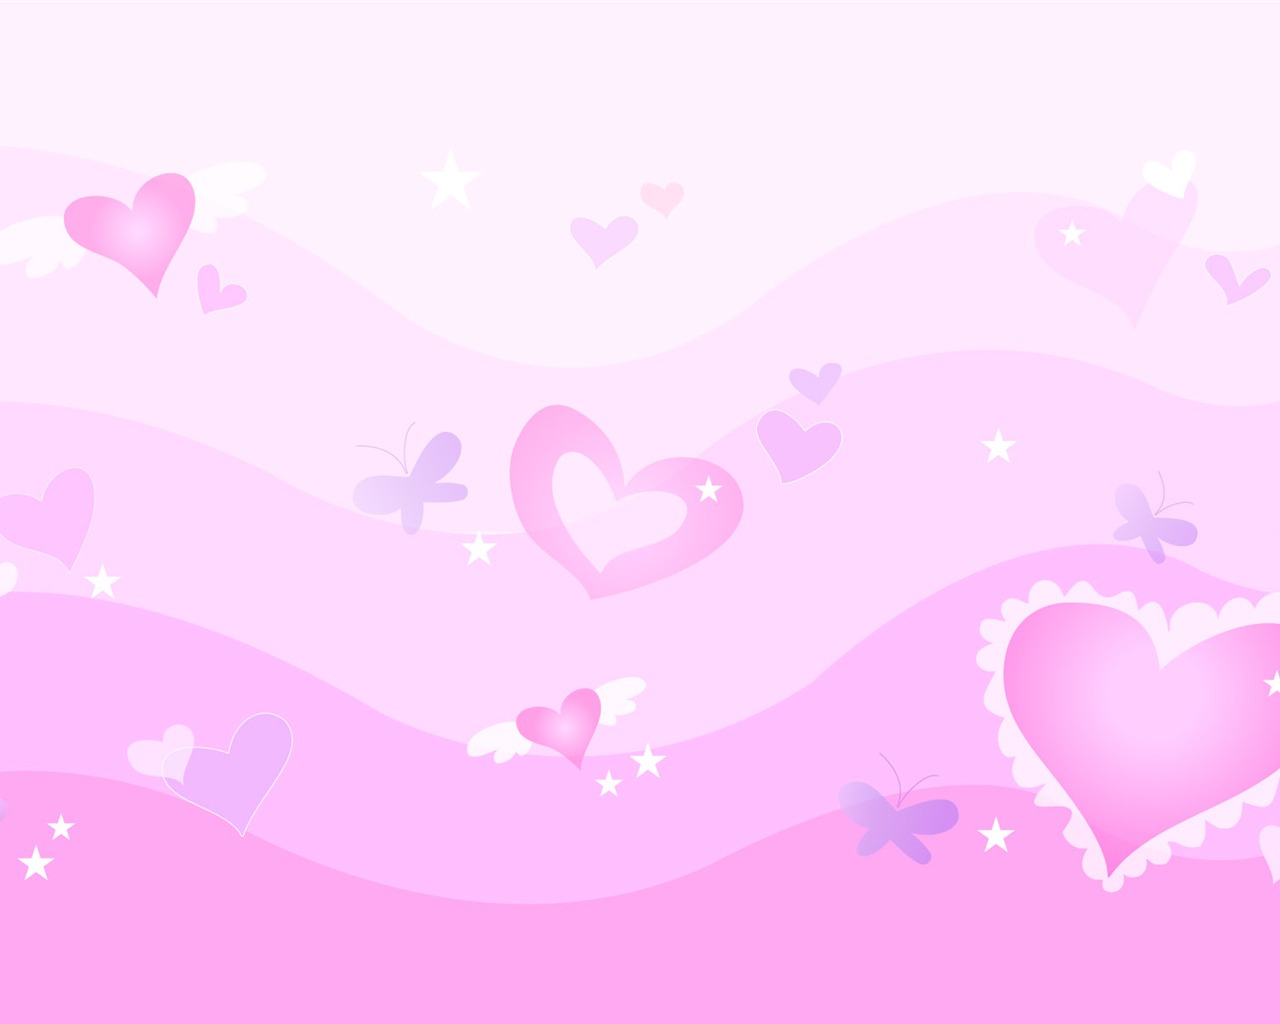 Valentine's Day Love Theme Wallpapers (2) #4 - 1280x1024